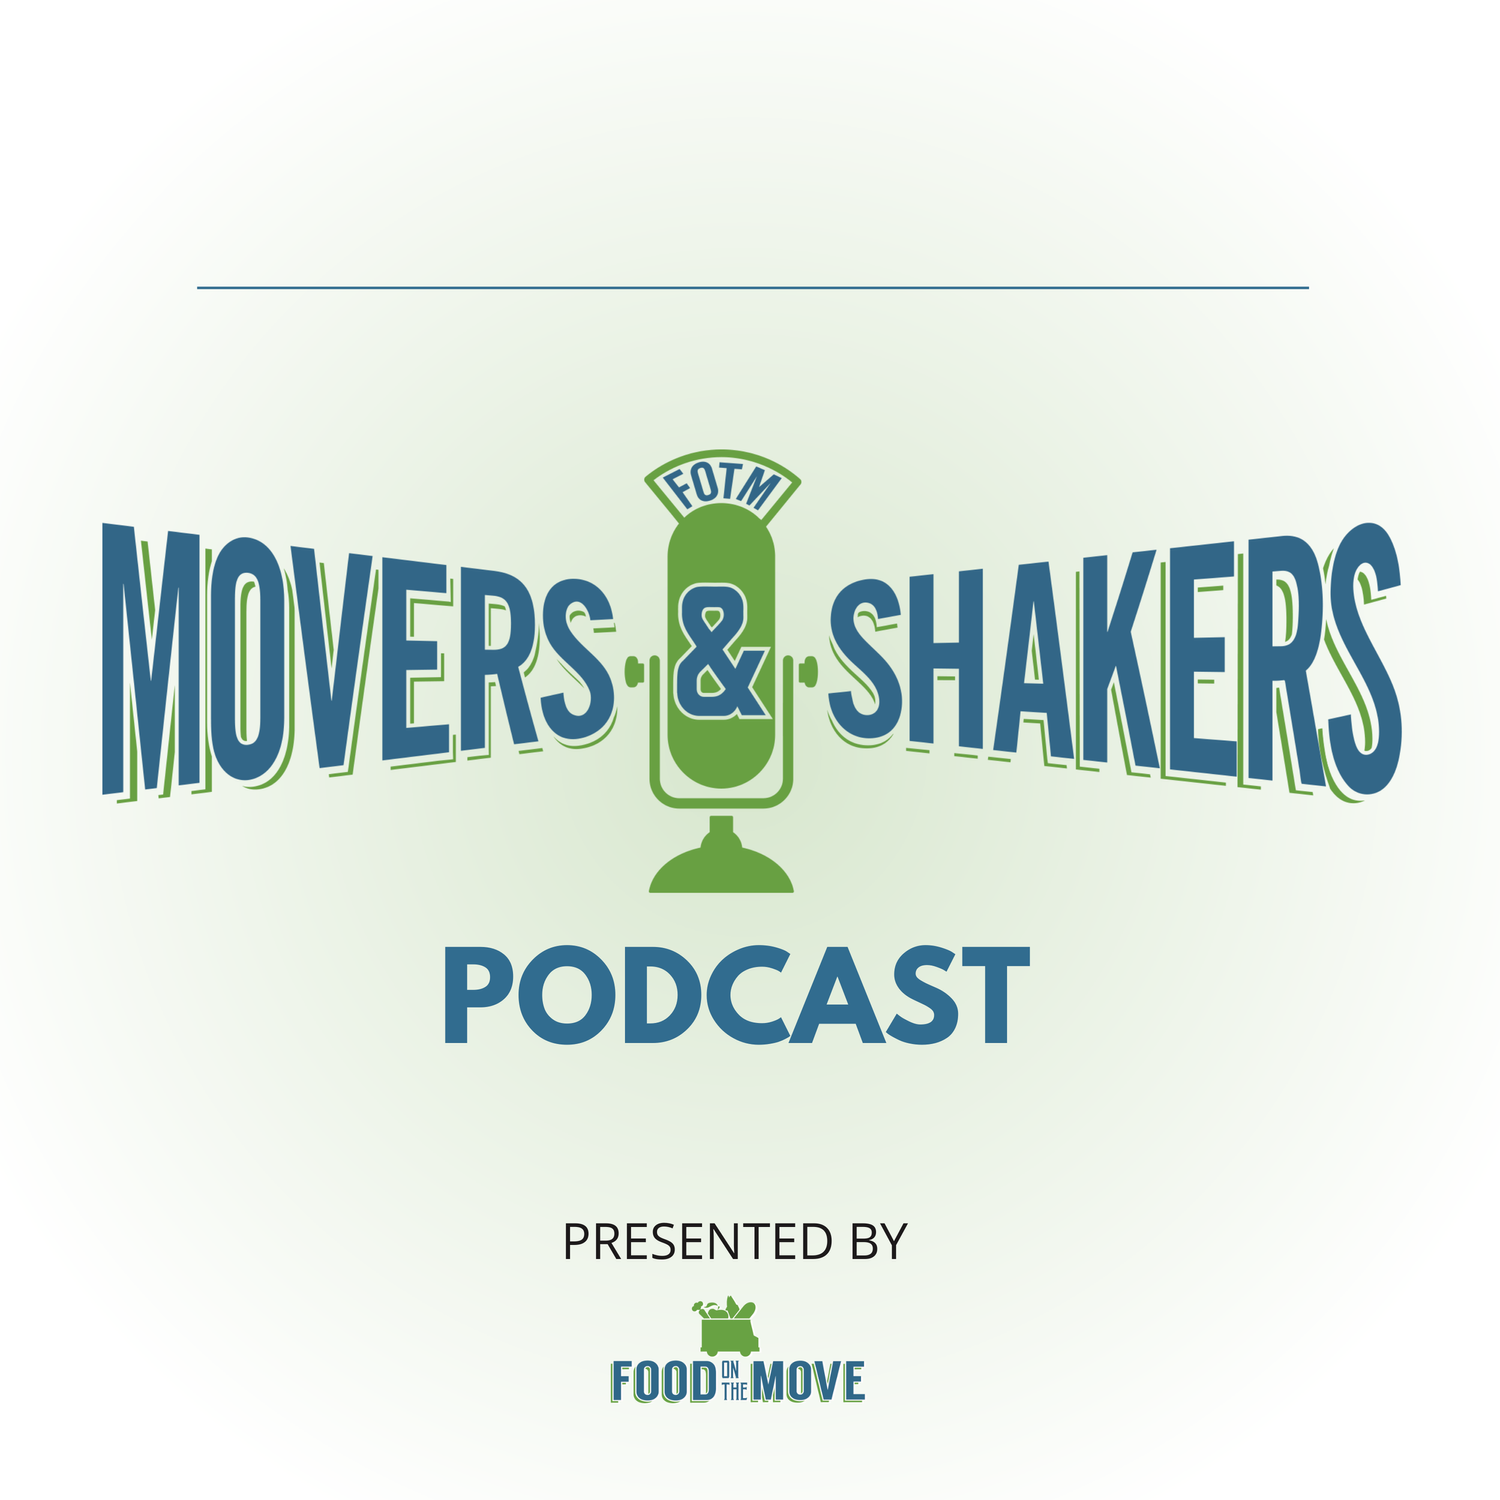 FOOD ON THE MOVE LAUNCHES 'MOVERS & SHAKERS' PODCAST — Food On The Move